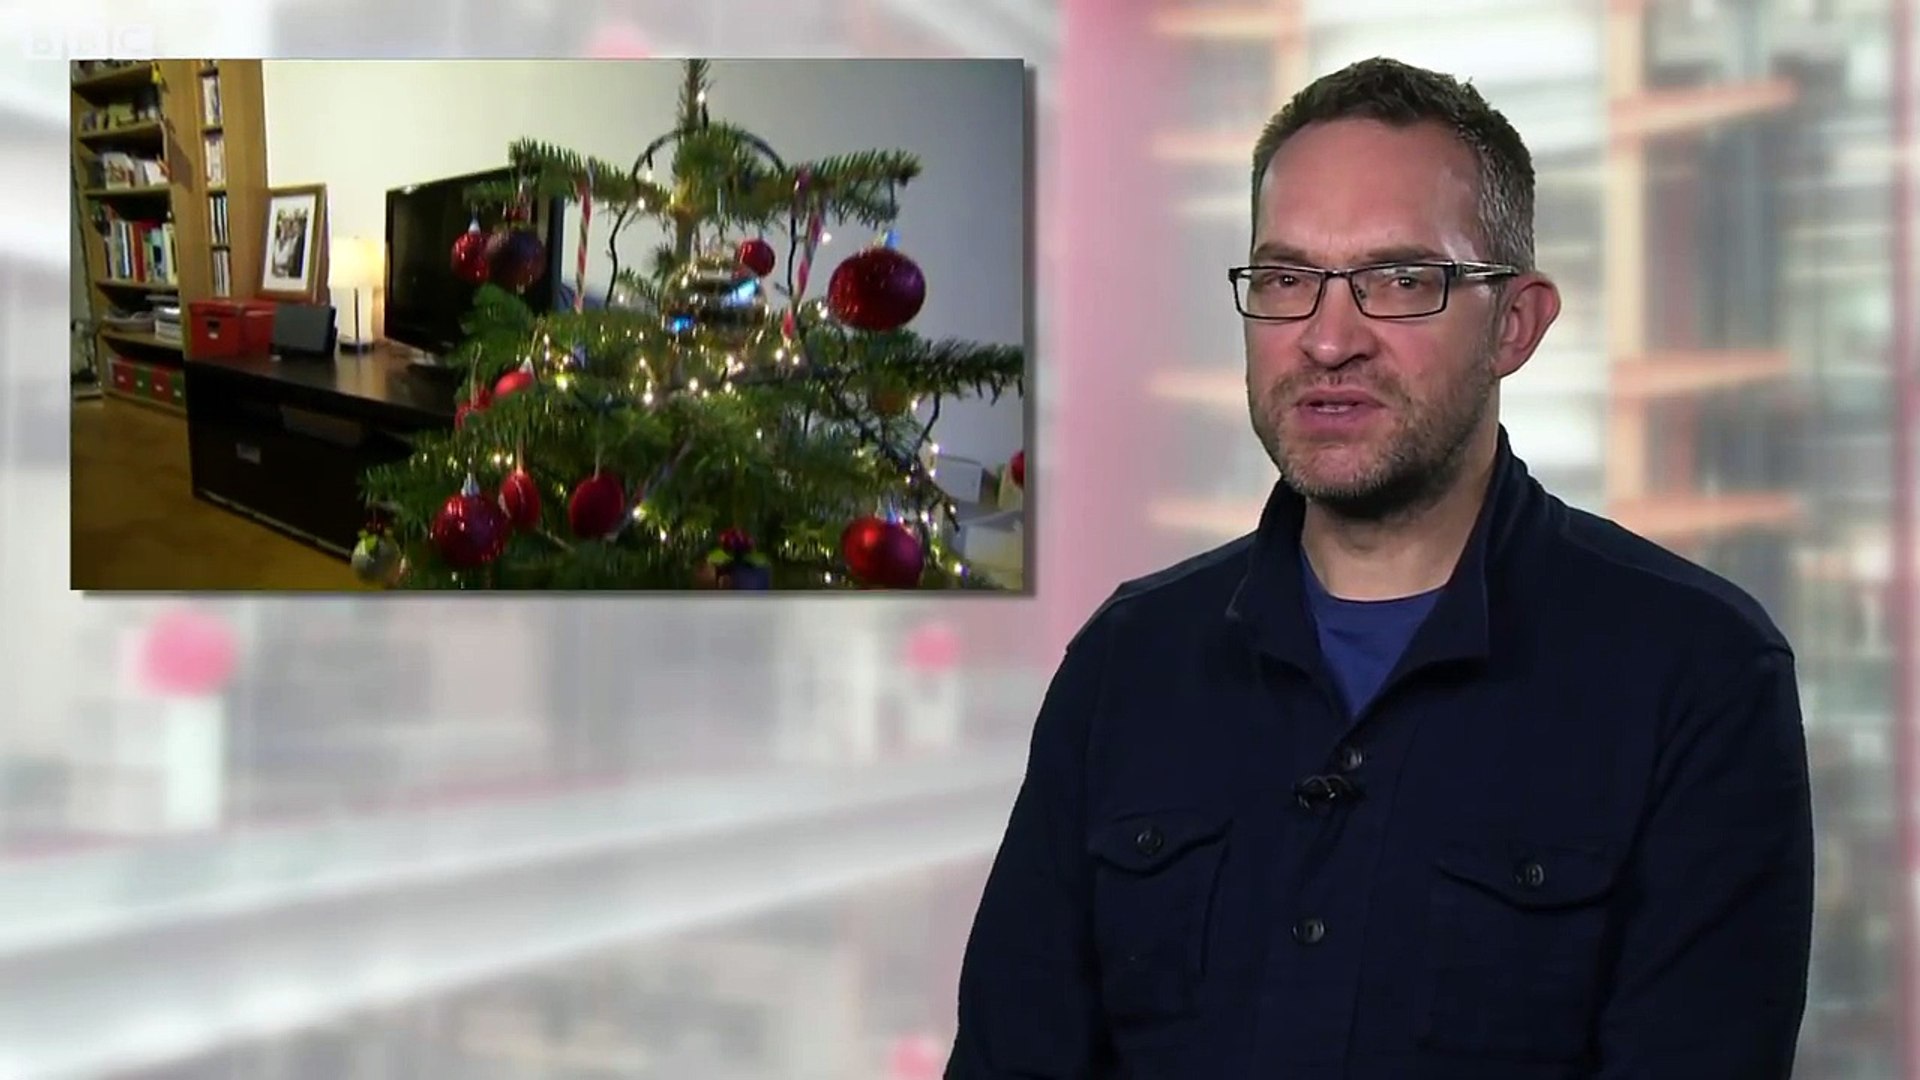 Title: BBC Learning English: Video Words in the News: Not just for Christmas  (31st December 2014)